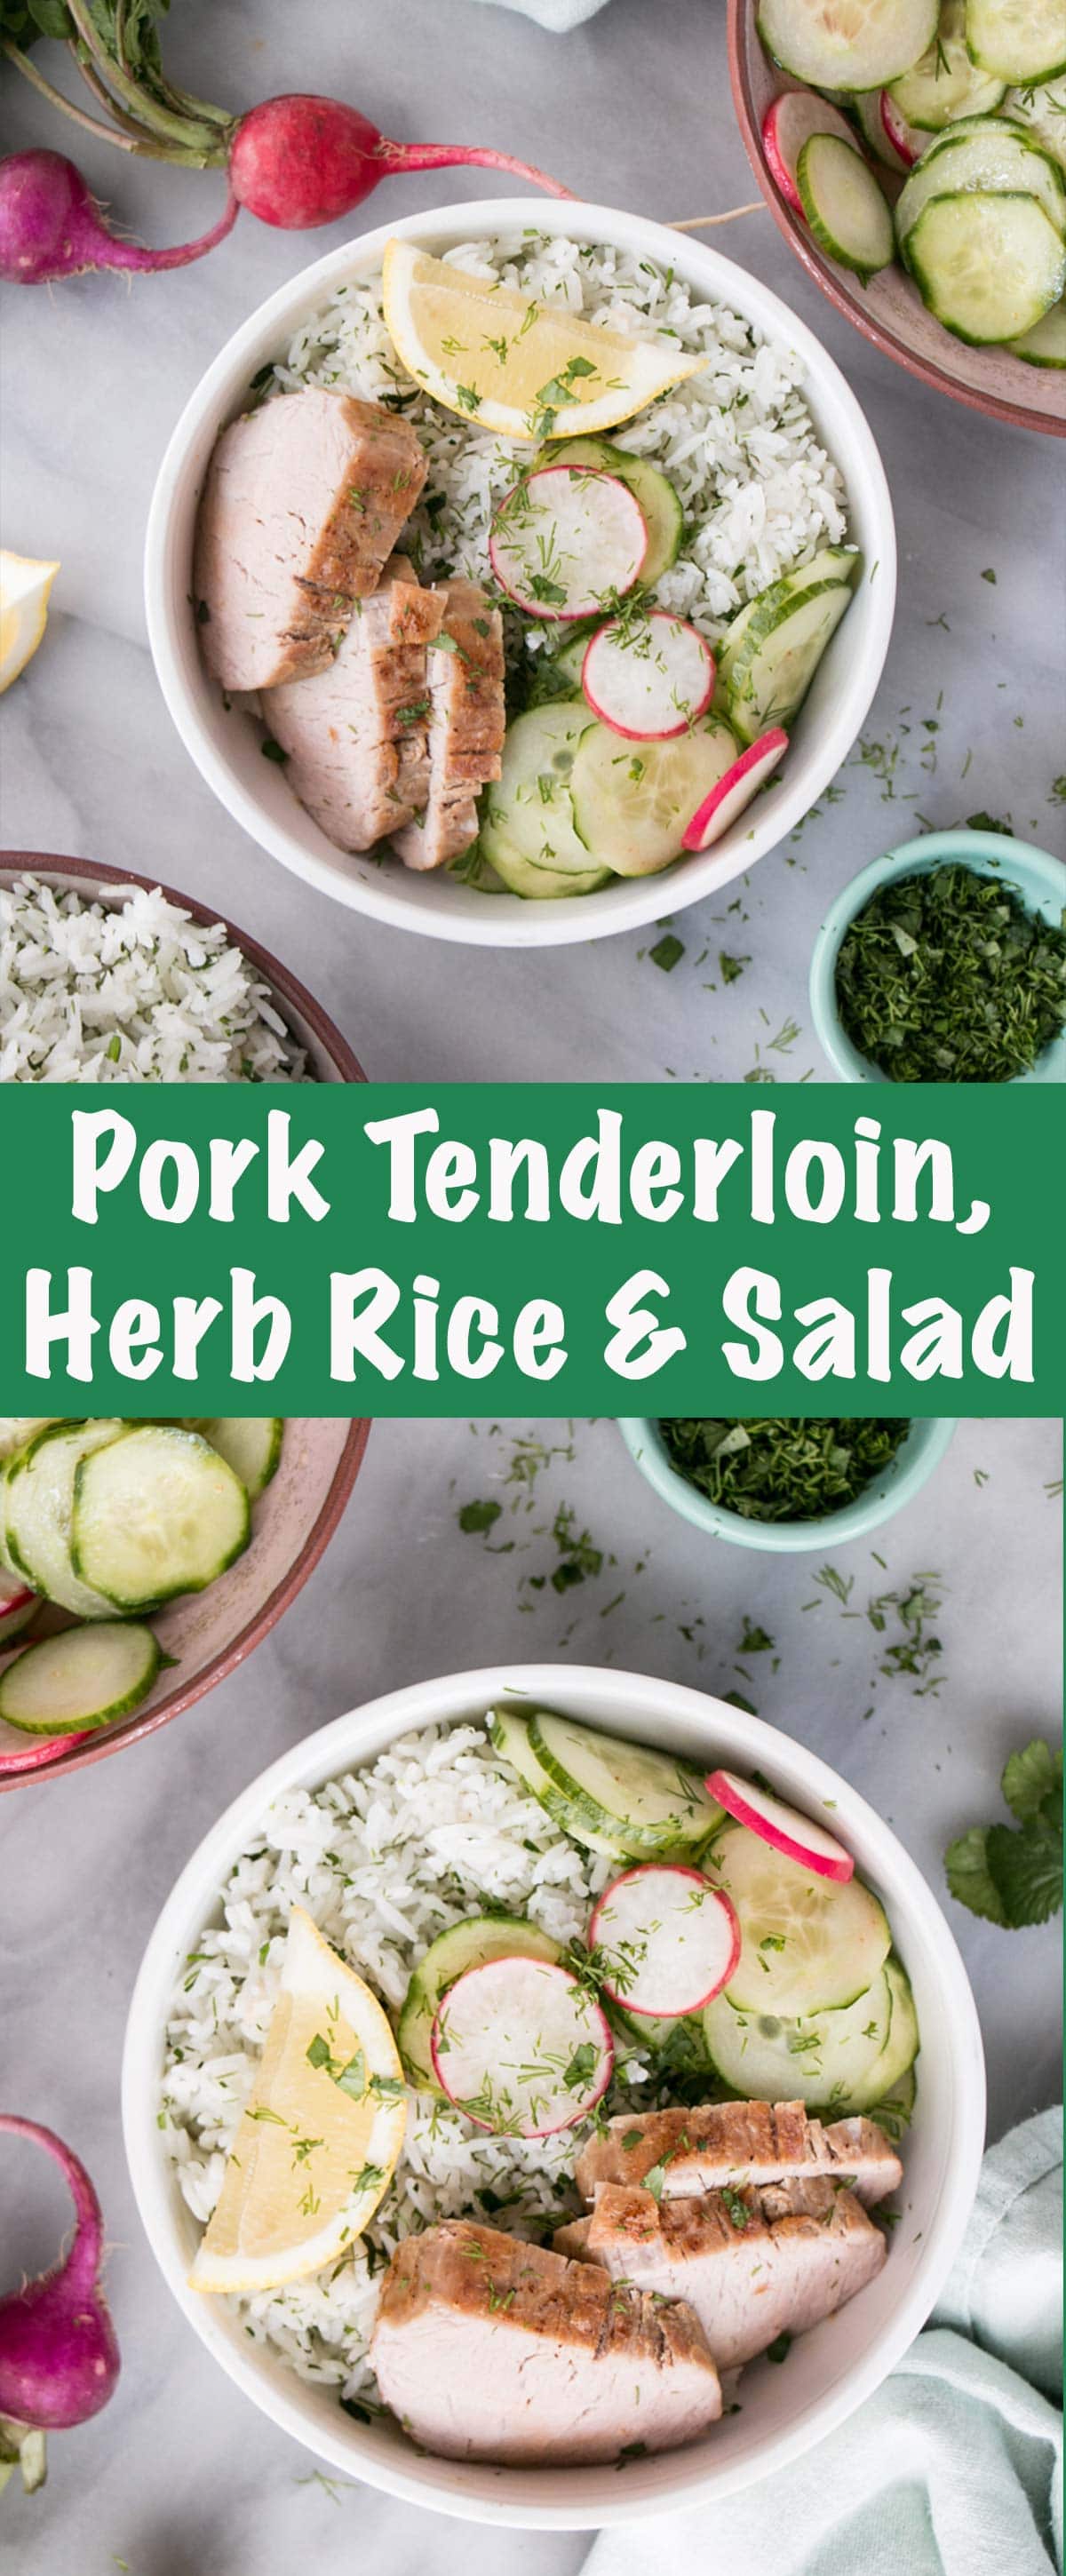 Easy Baked Pork Tenderloin recipe with fresh crisp salad and herbaceous rice. A wholesome Spring meal that comes together quickly and is kid-approved! via @mykitchenlove